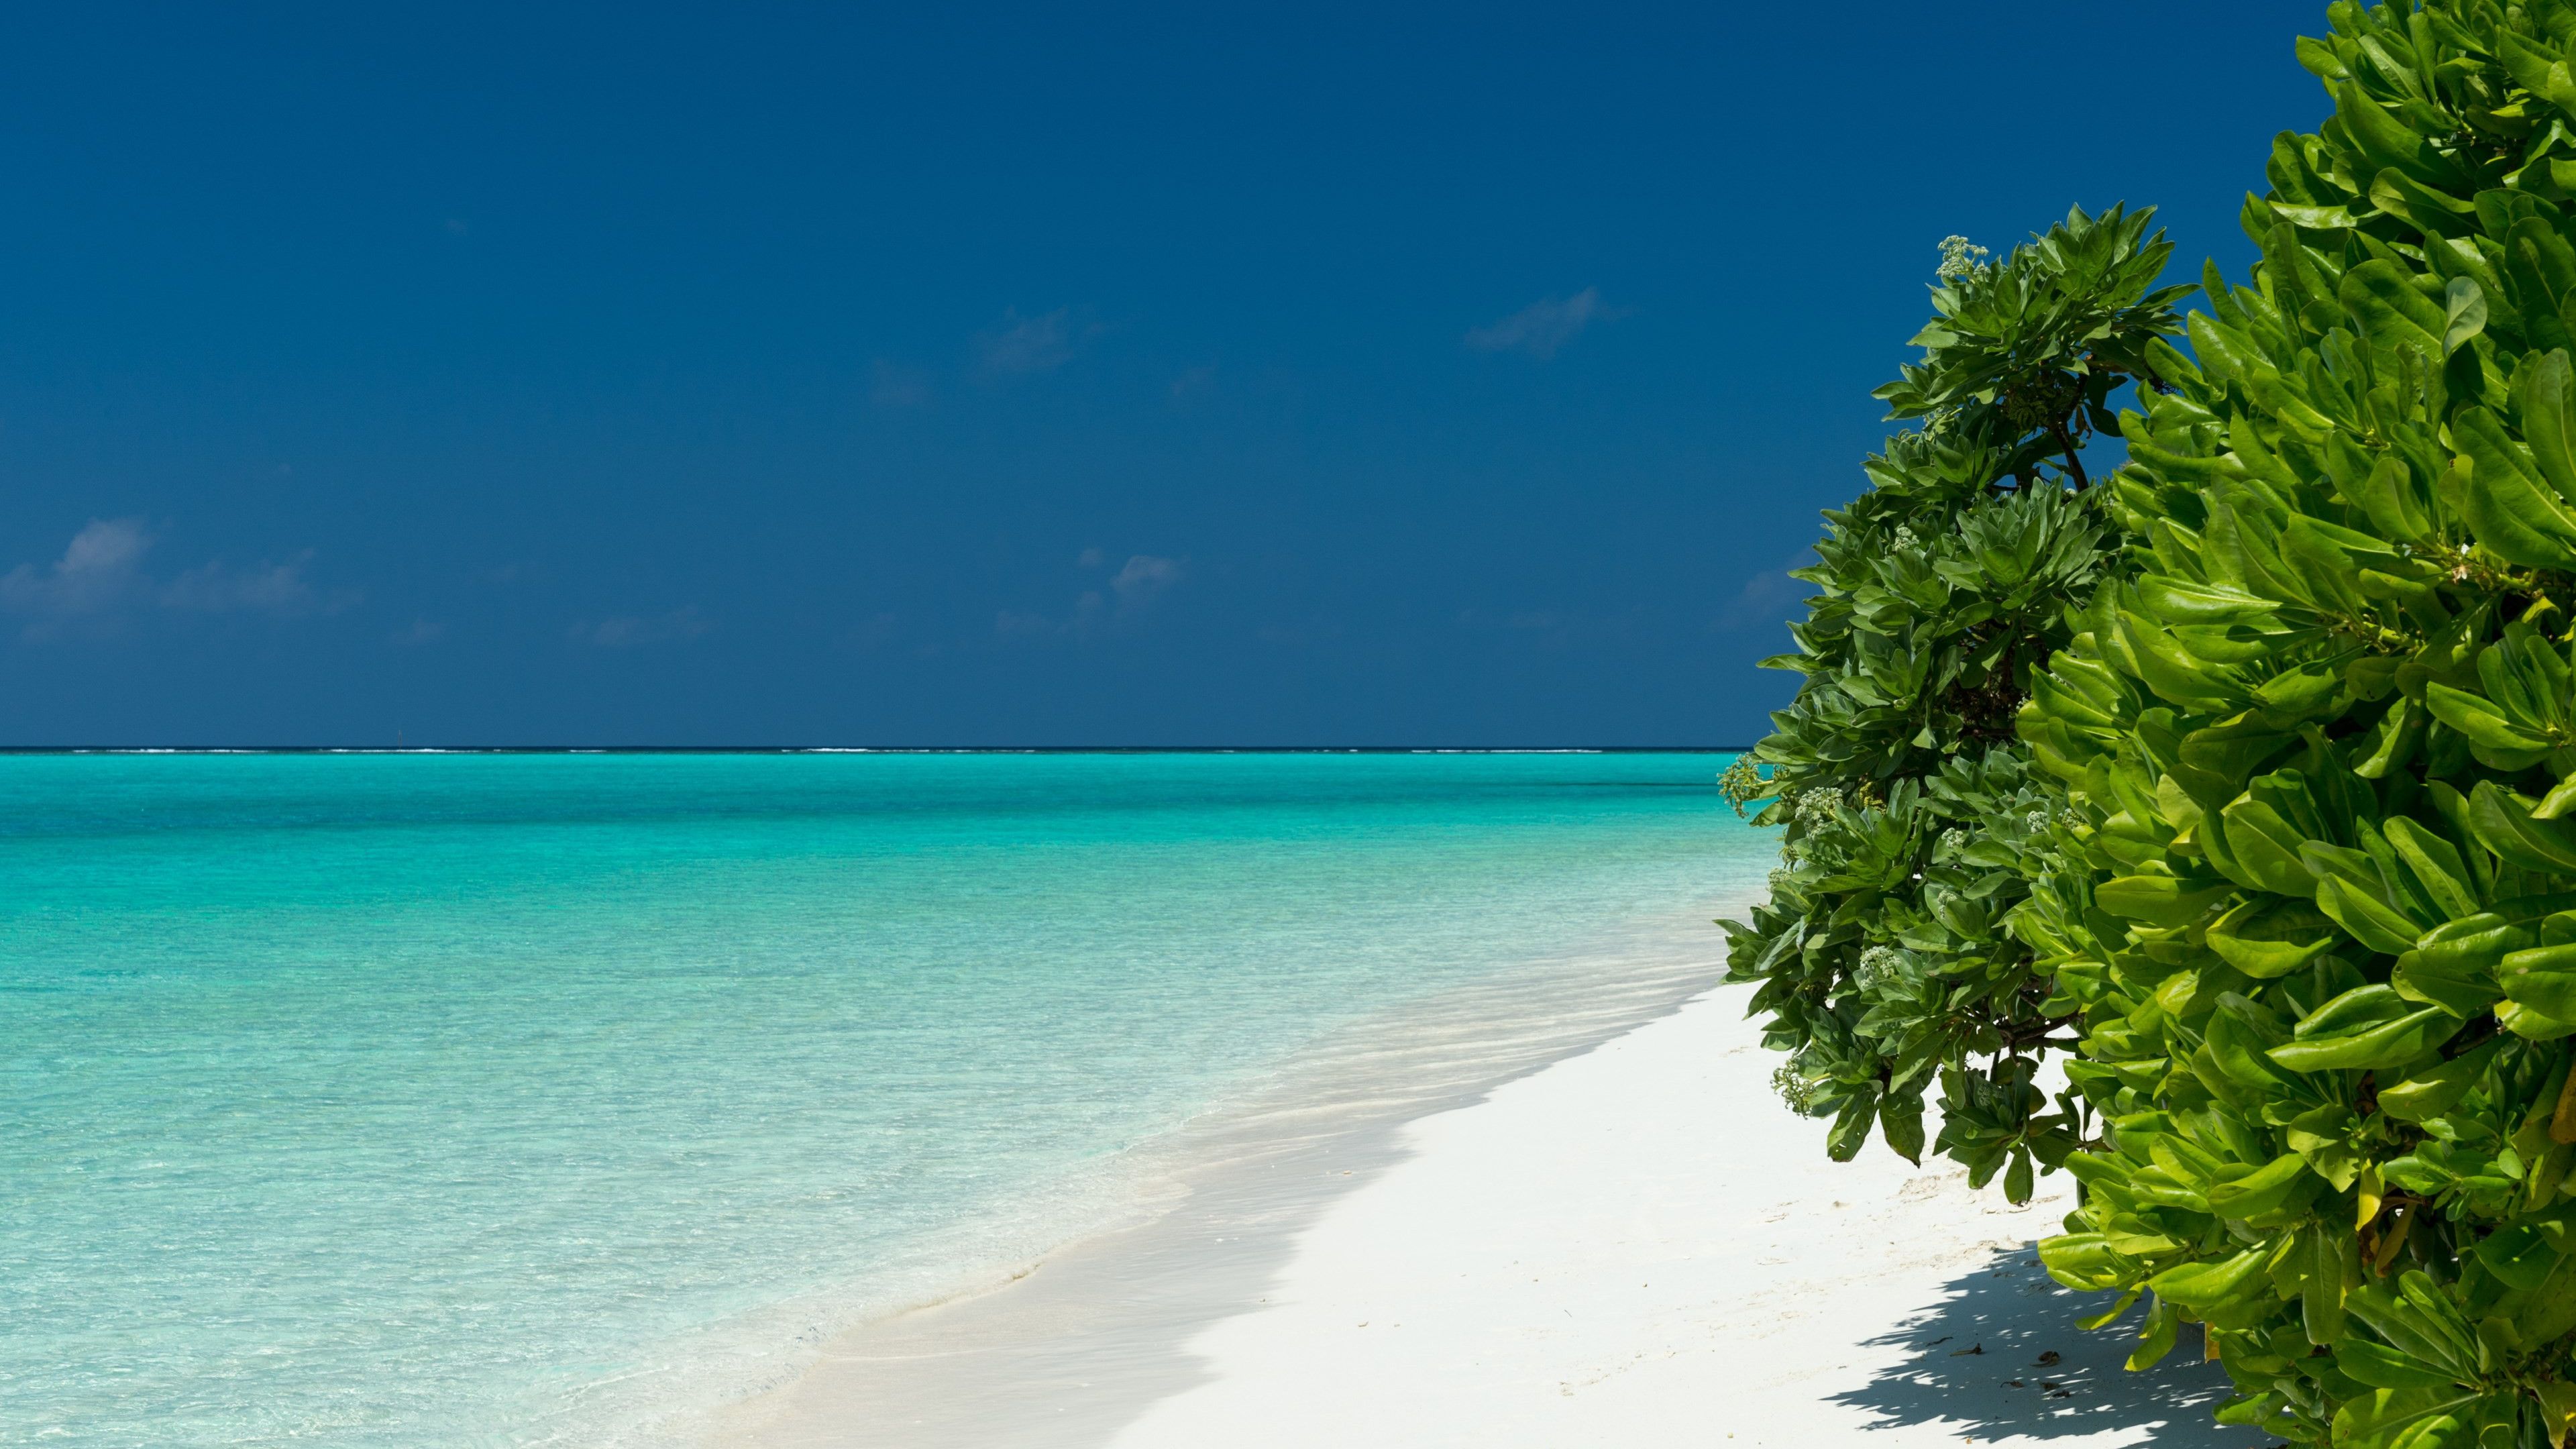 Download wallpaper: Turquoise waters of Maldives 3840x2160